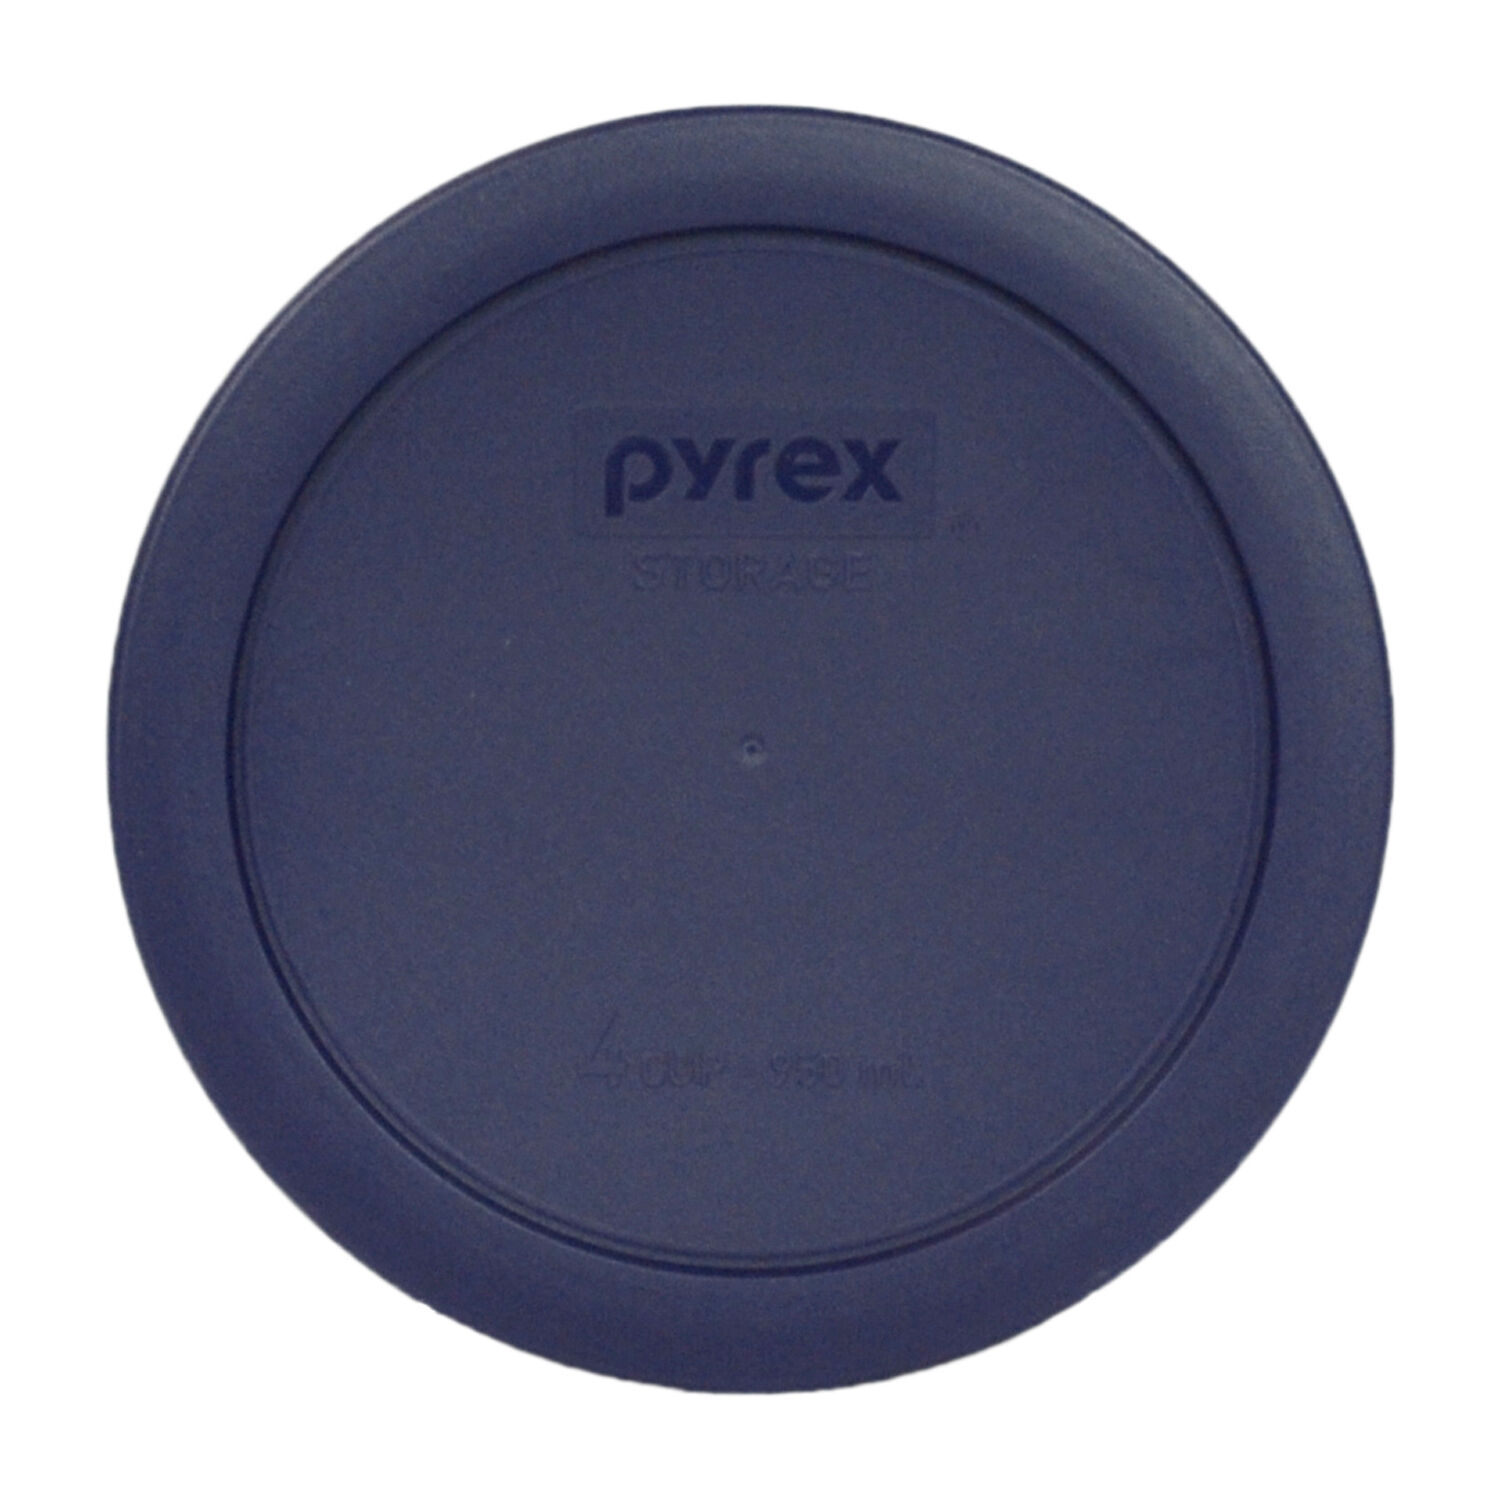 Pyrex 7201-PC Round 4 Cup Blue Food Storage Lid Cover for 7201 Dish (4 Pack) Pyrex 7201PC - фотография #4